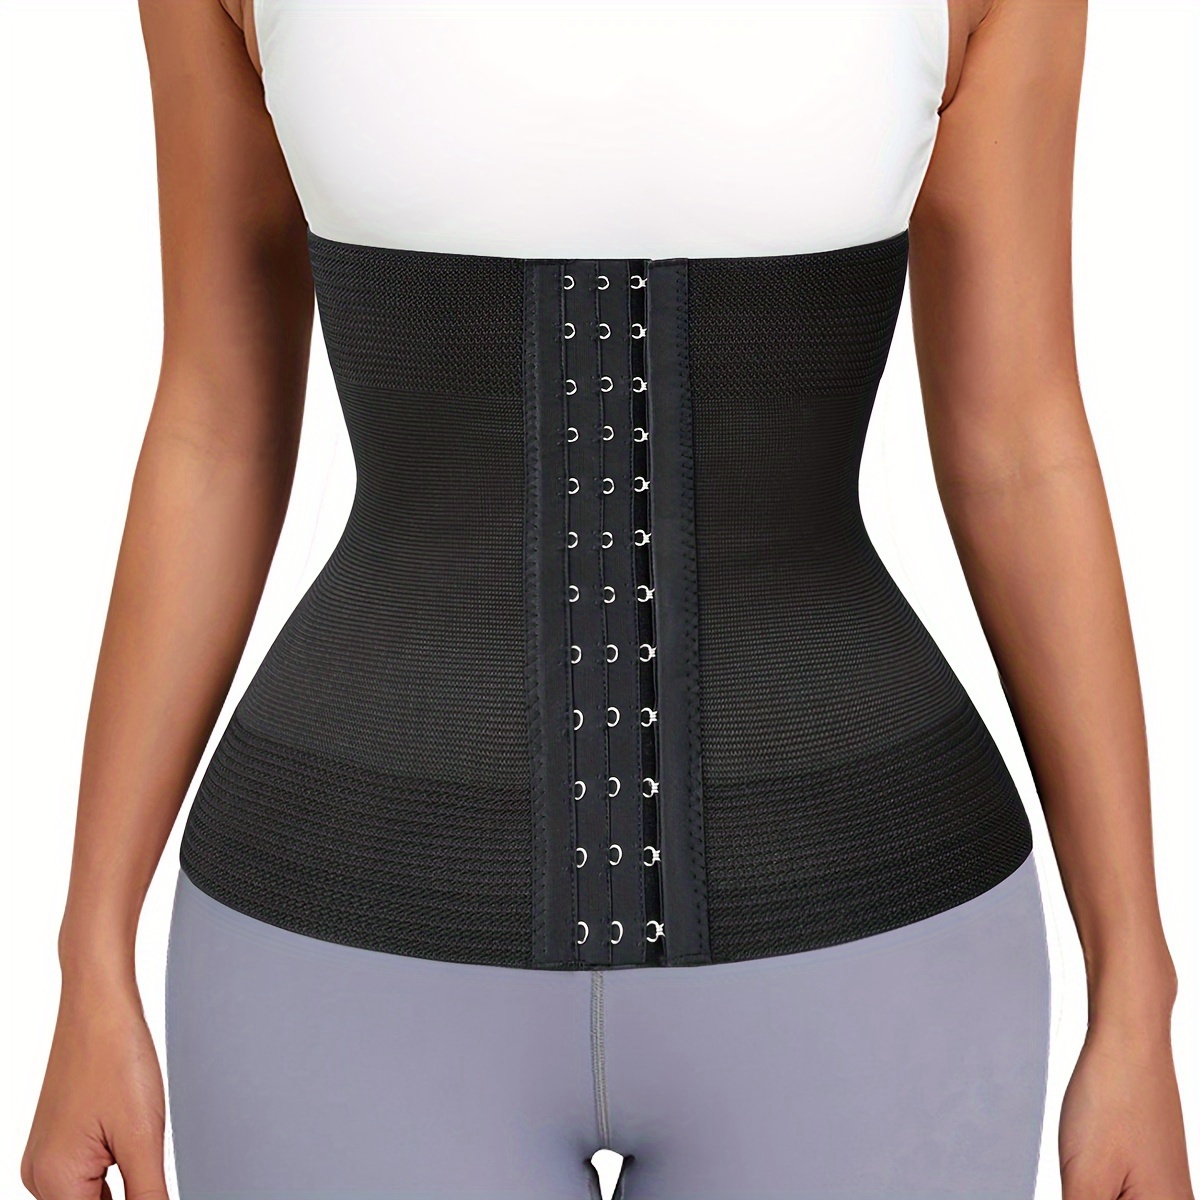 

1pc Waist Cincher Corset, Breathable Waist Trainer Belt, Slimming Tummy Wrap, Postpartum Recovery Shapewear, Adjustable Hook-and-eye Closure, Black - Available In Multiple Sizes